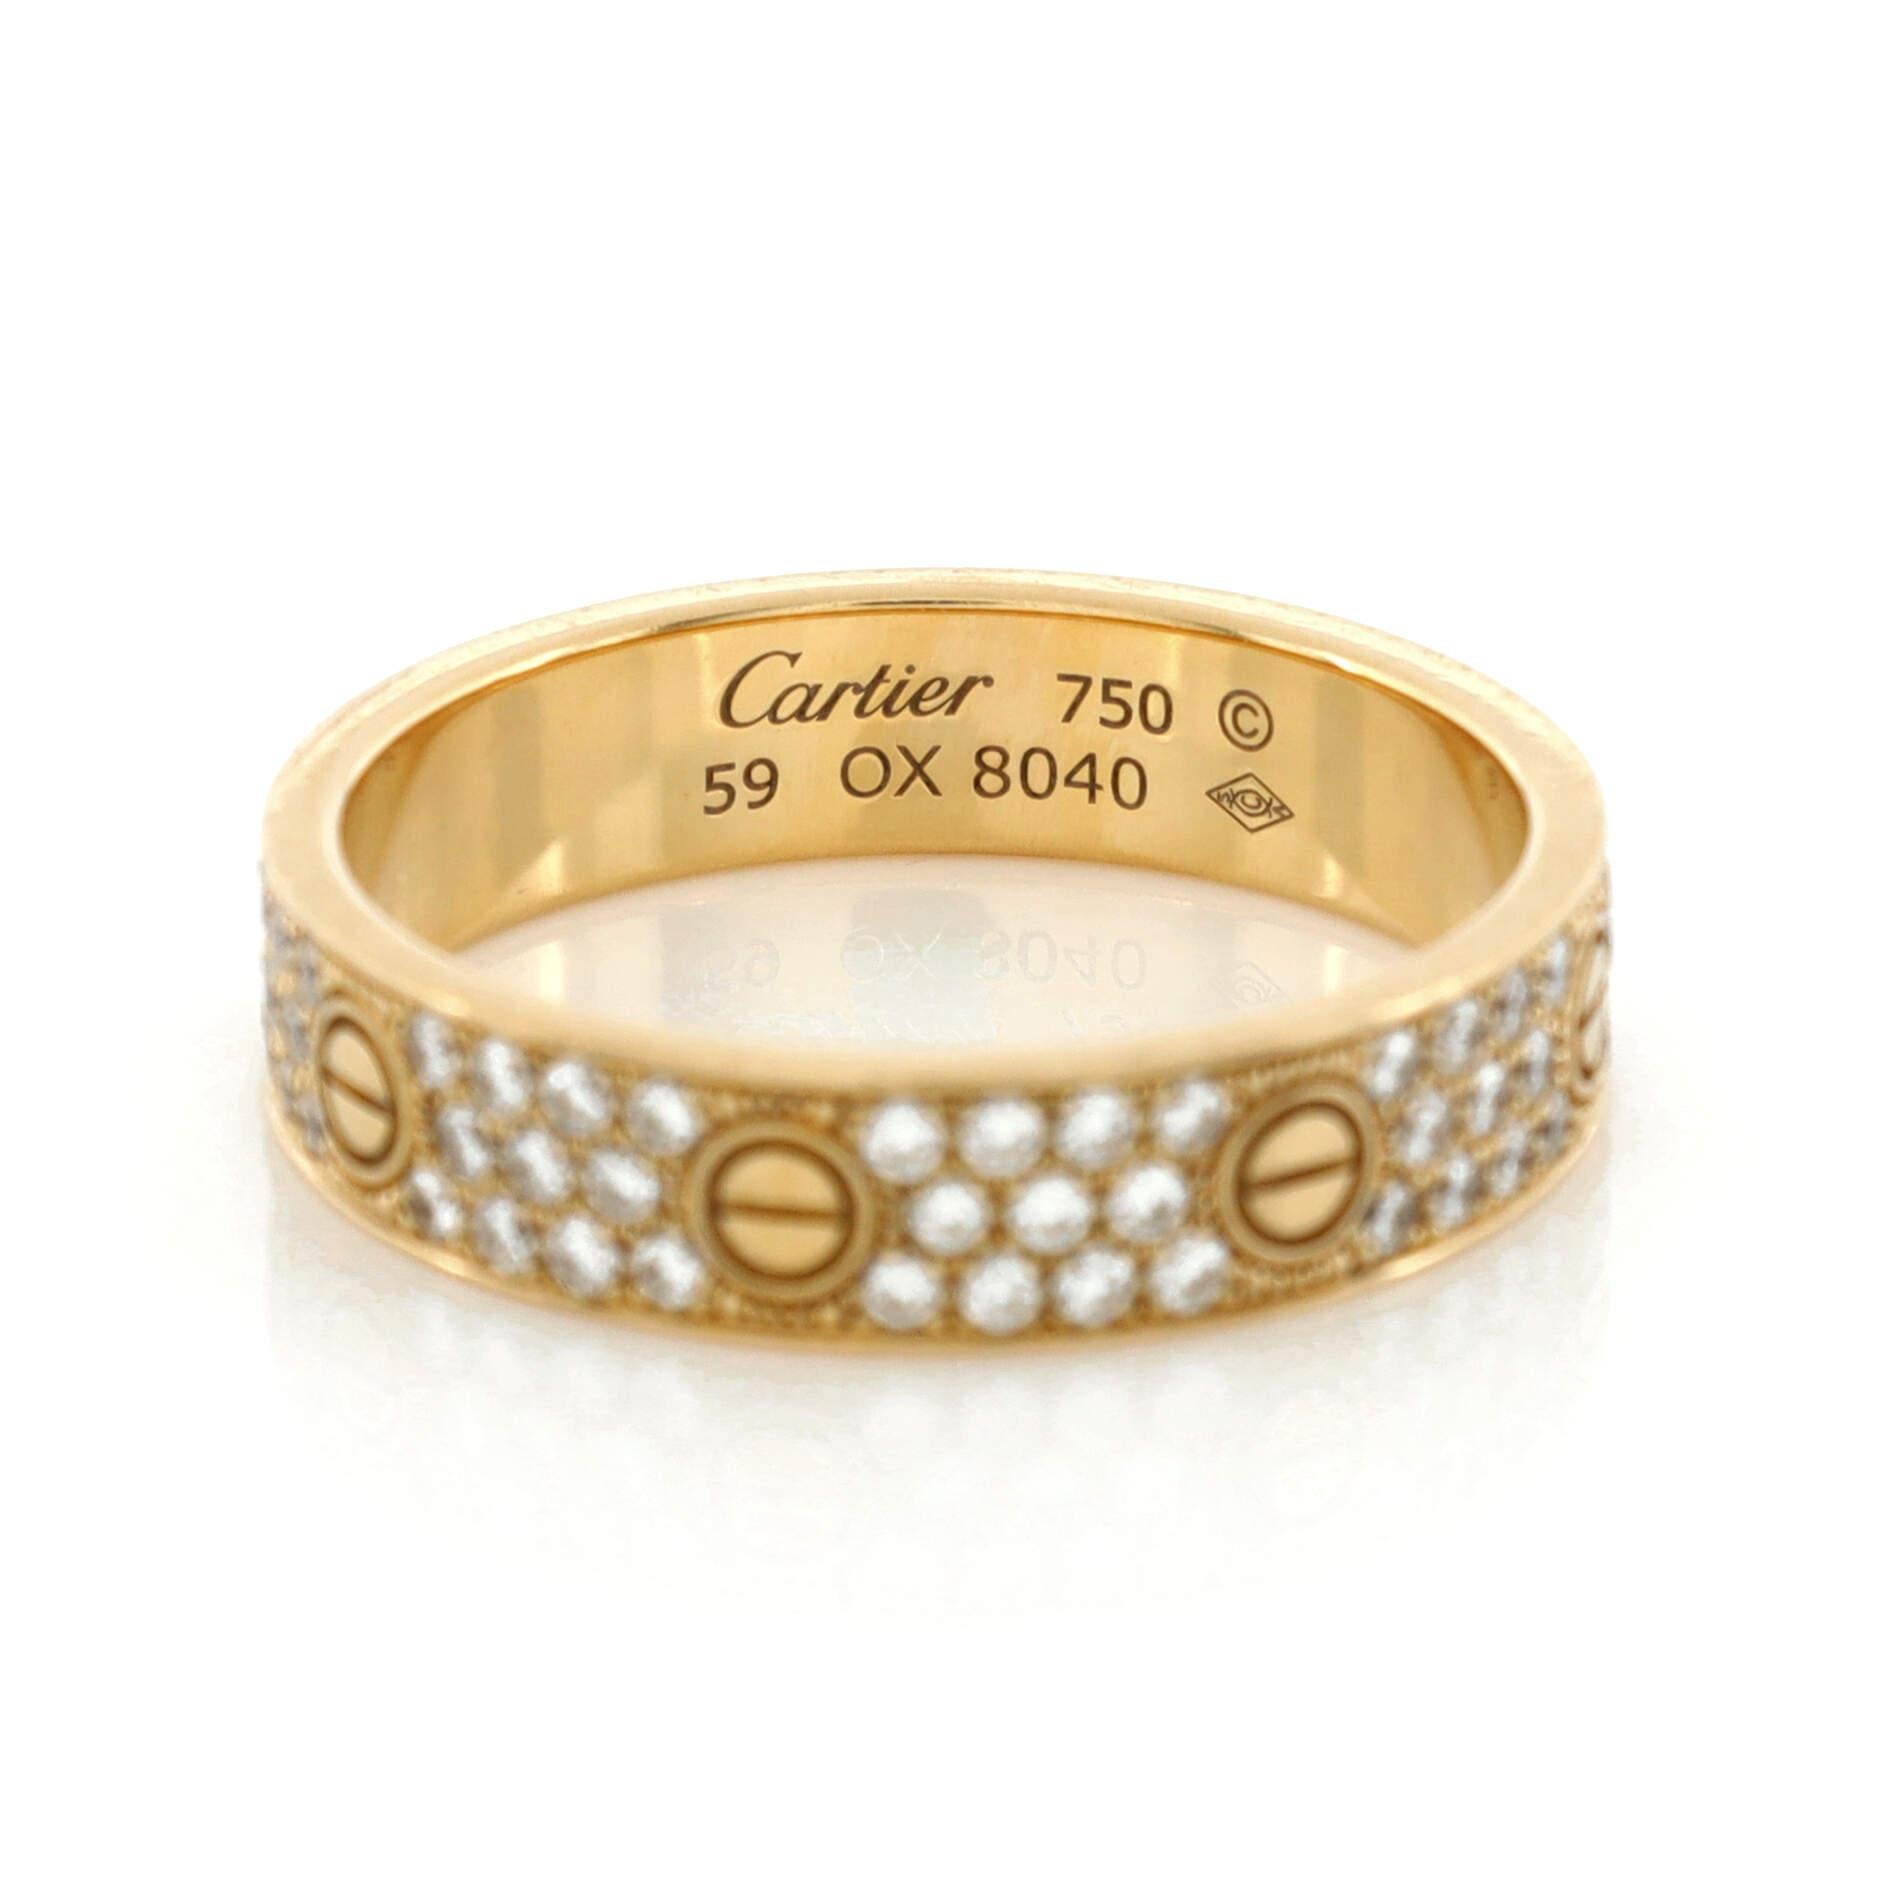 Women's or Men's Cartier Love Wedding Band Pave Diamonds Ring 18K Yellow Gold and Diamonds